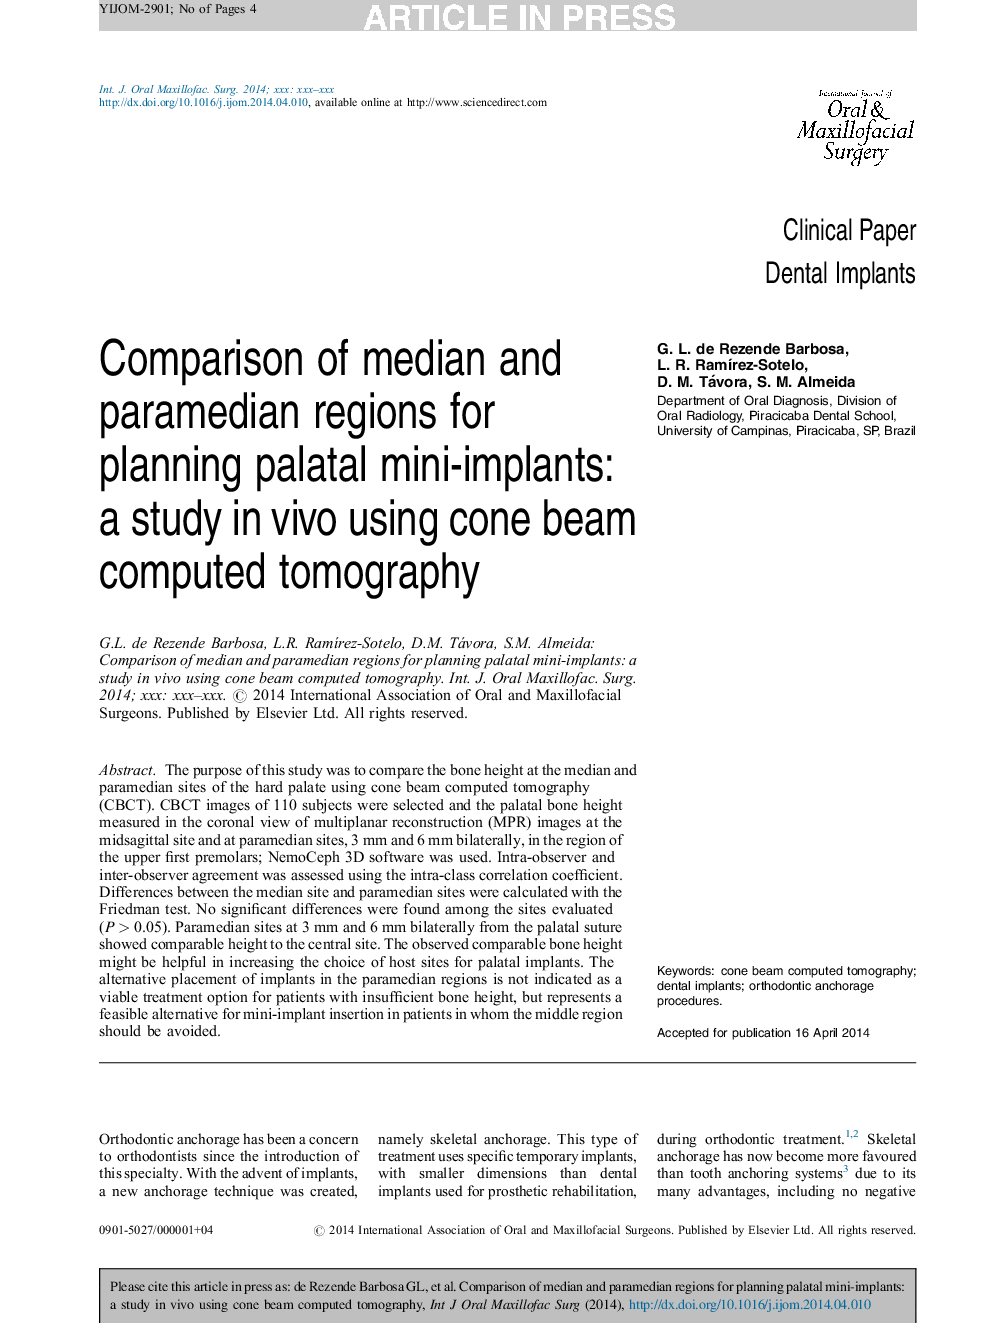 Comparison of median and paramedian regions for planning palatal mini-implants: a study in vivo using cone beam computed tomography